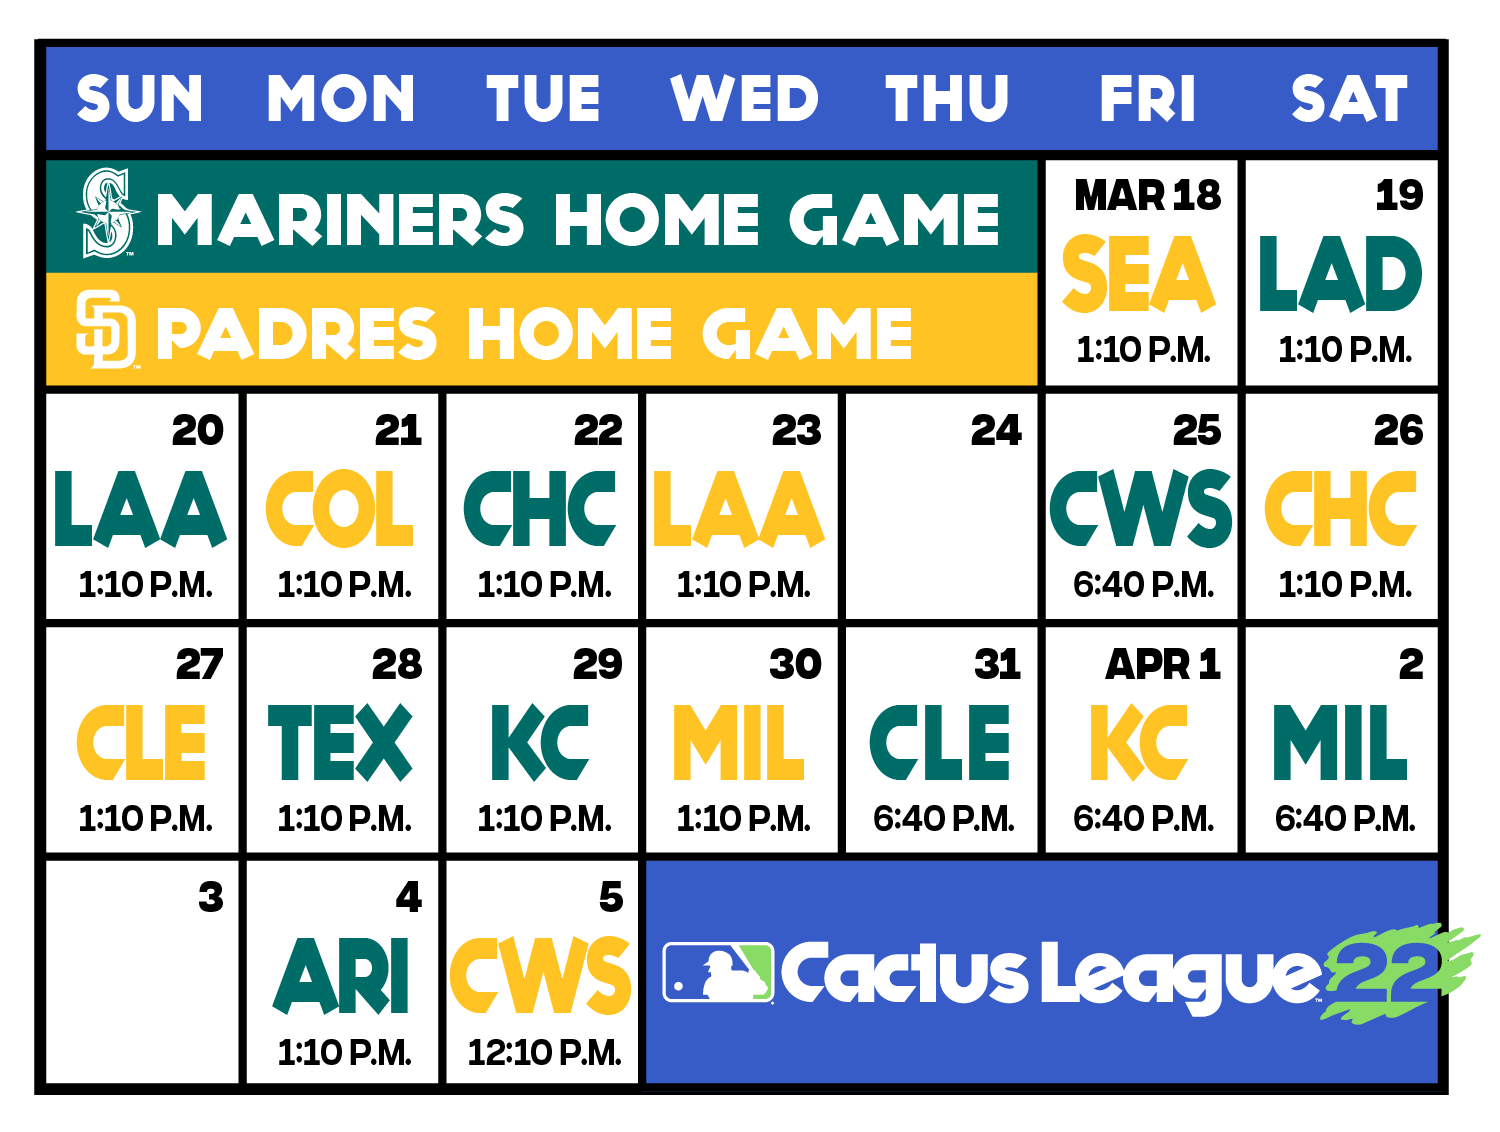 Spring Training Final Schedule with times